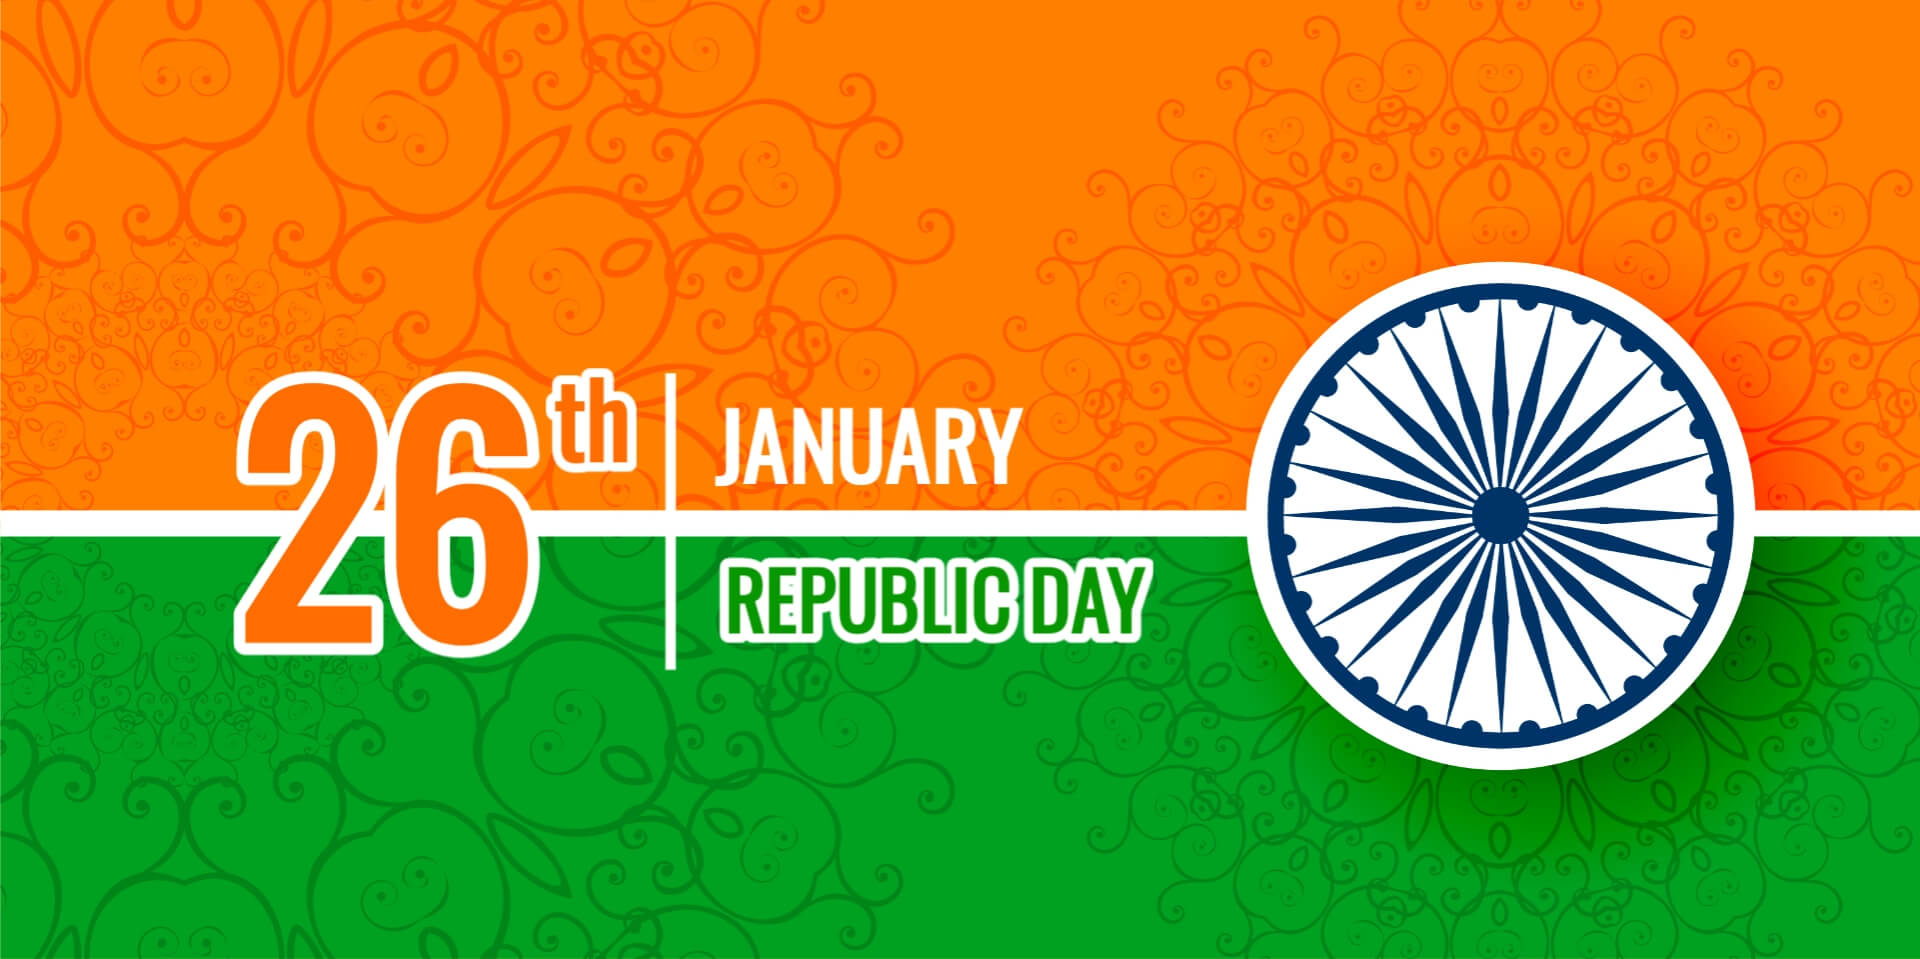 Happy republic day of india background Royalty Free Vector